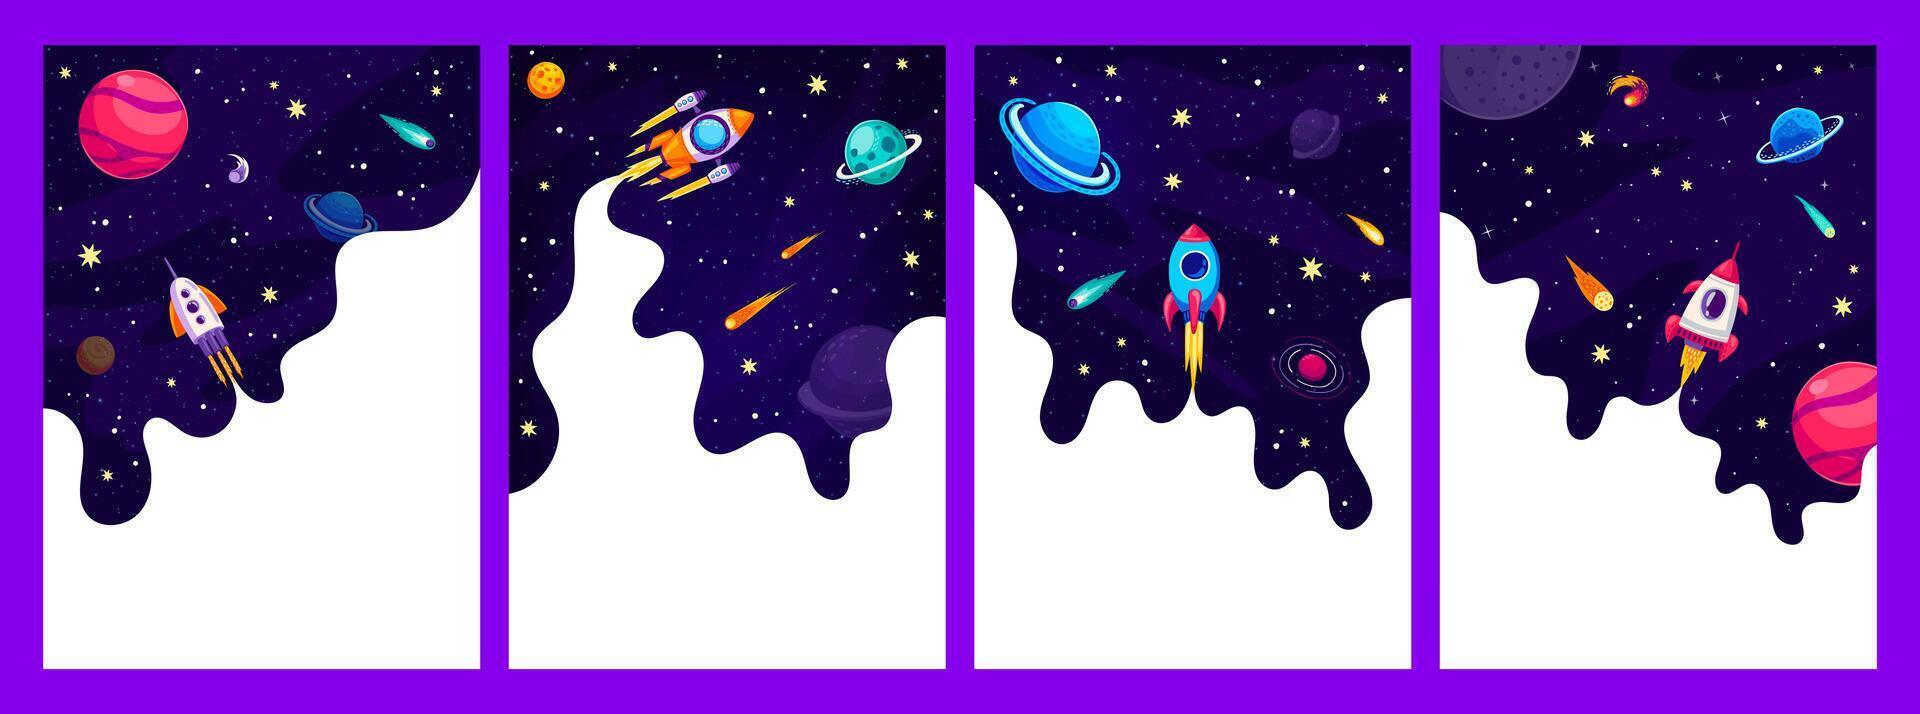 Galaxy space posters or frames with rocket launch vector